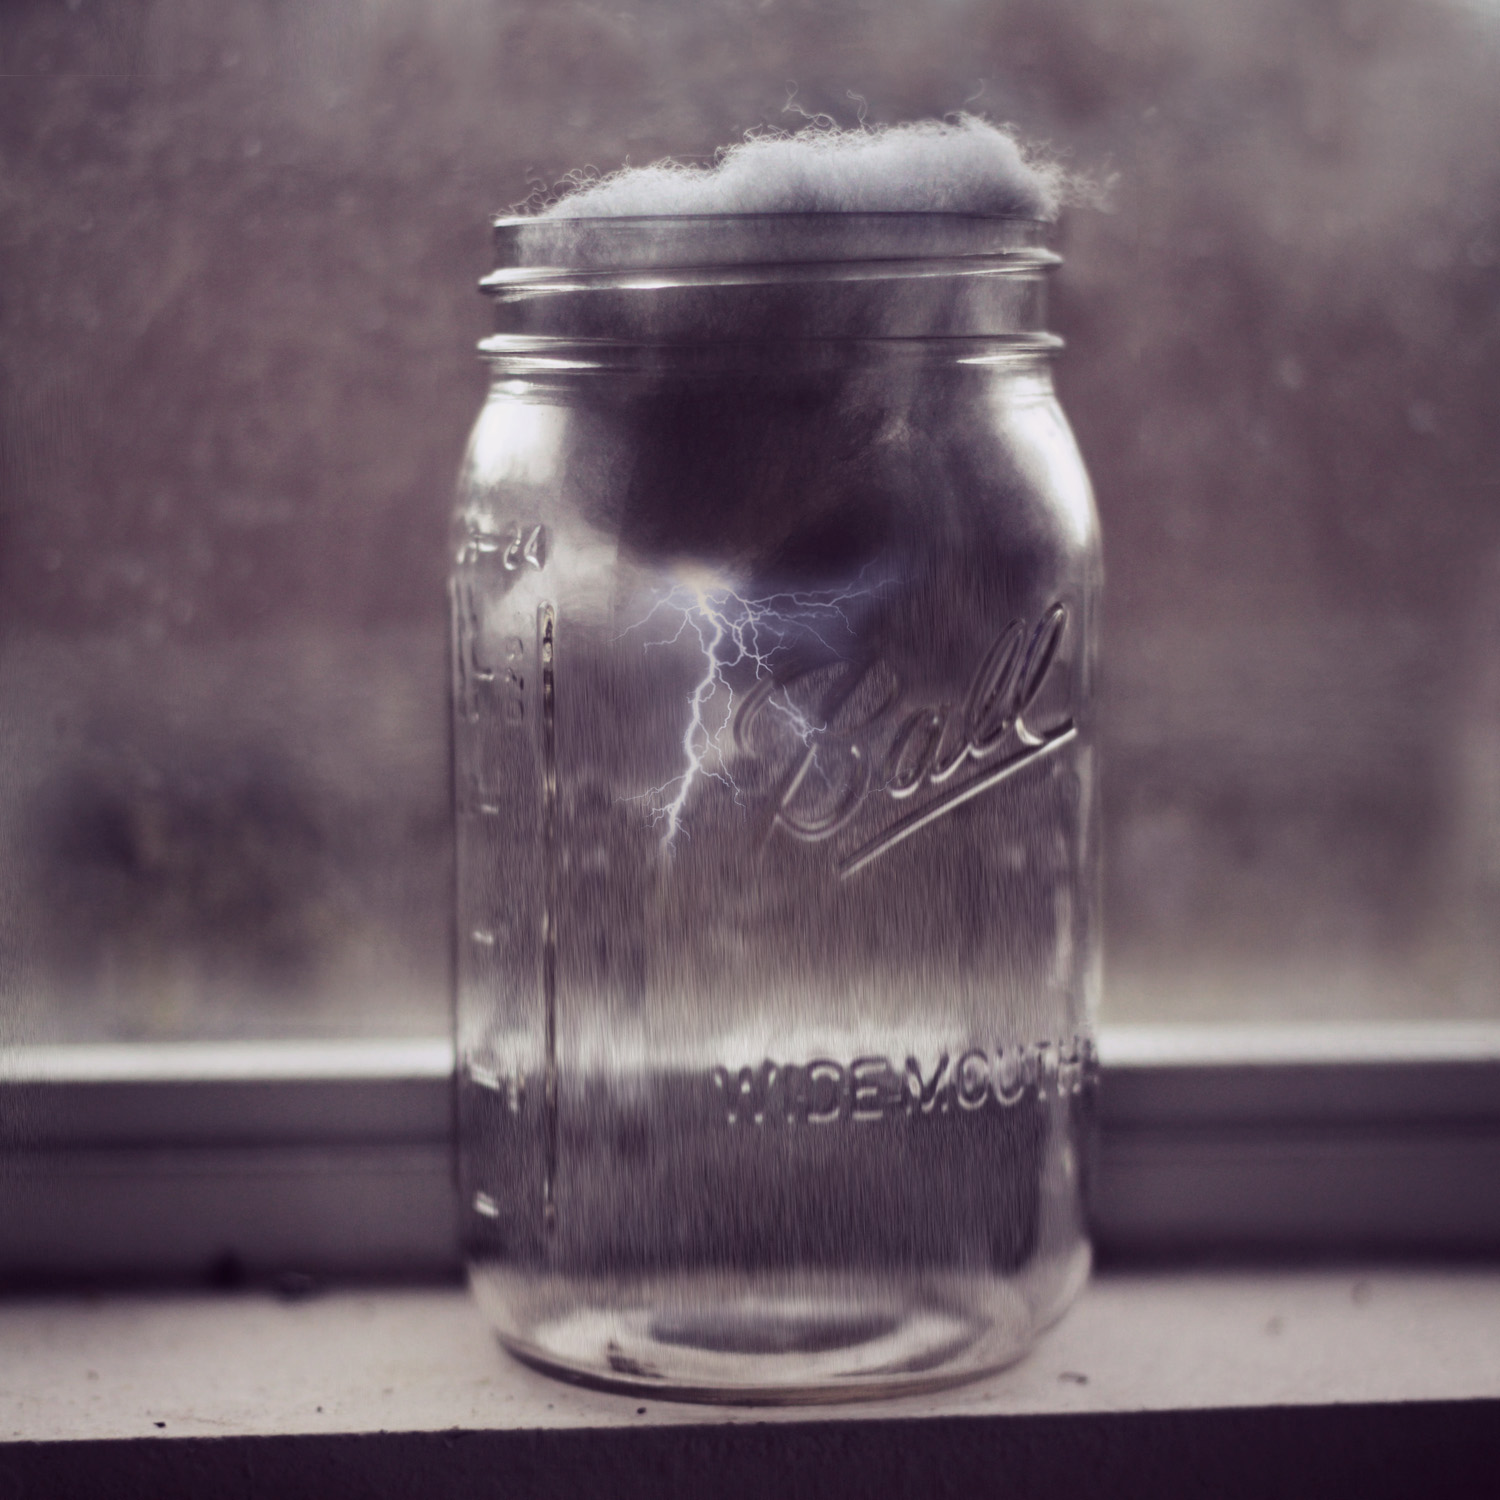 the old mason jar is on the window sill